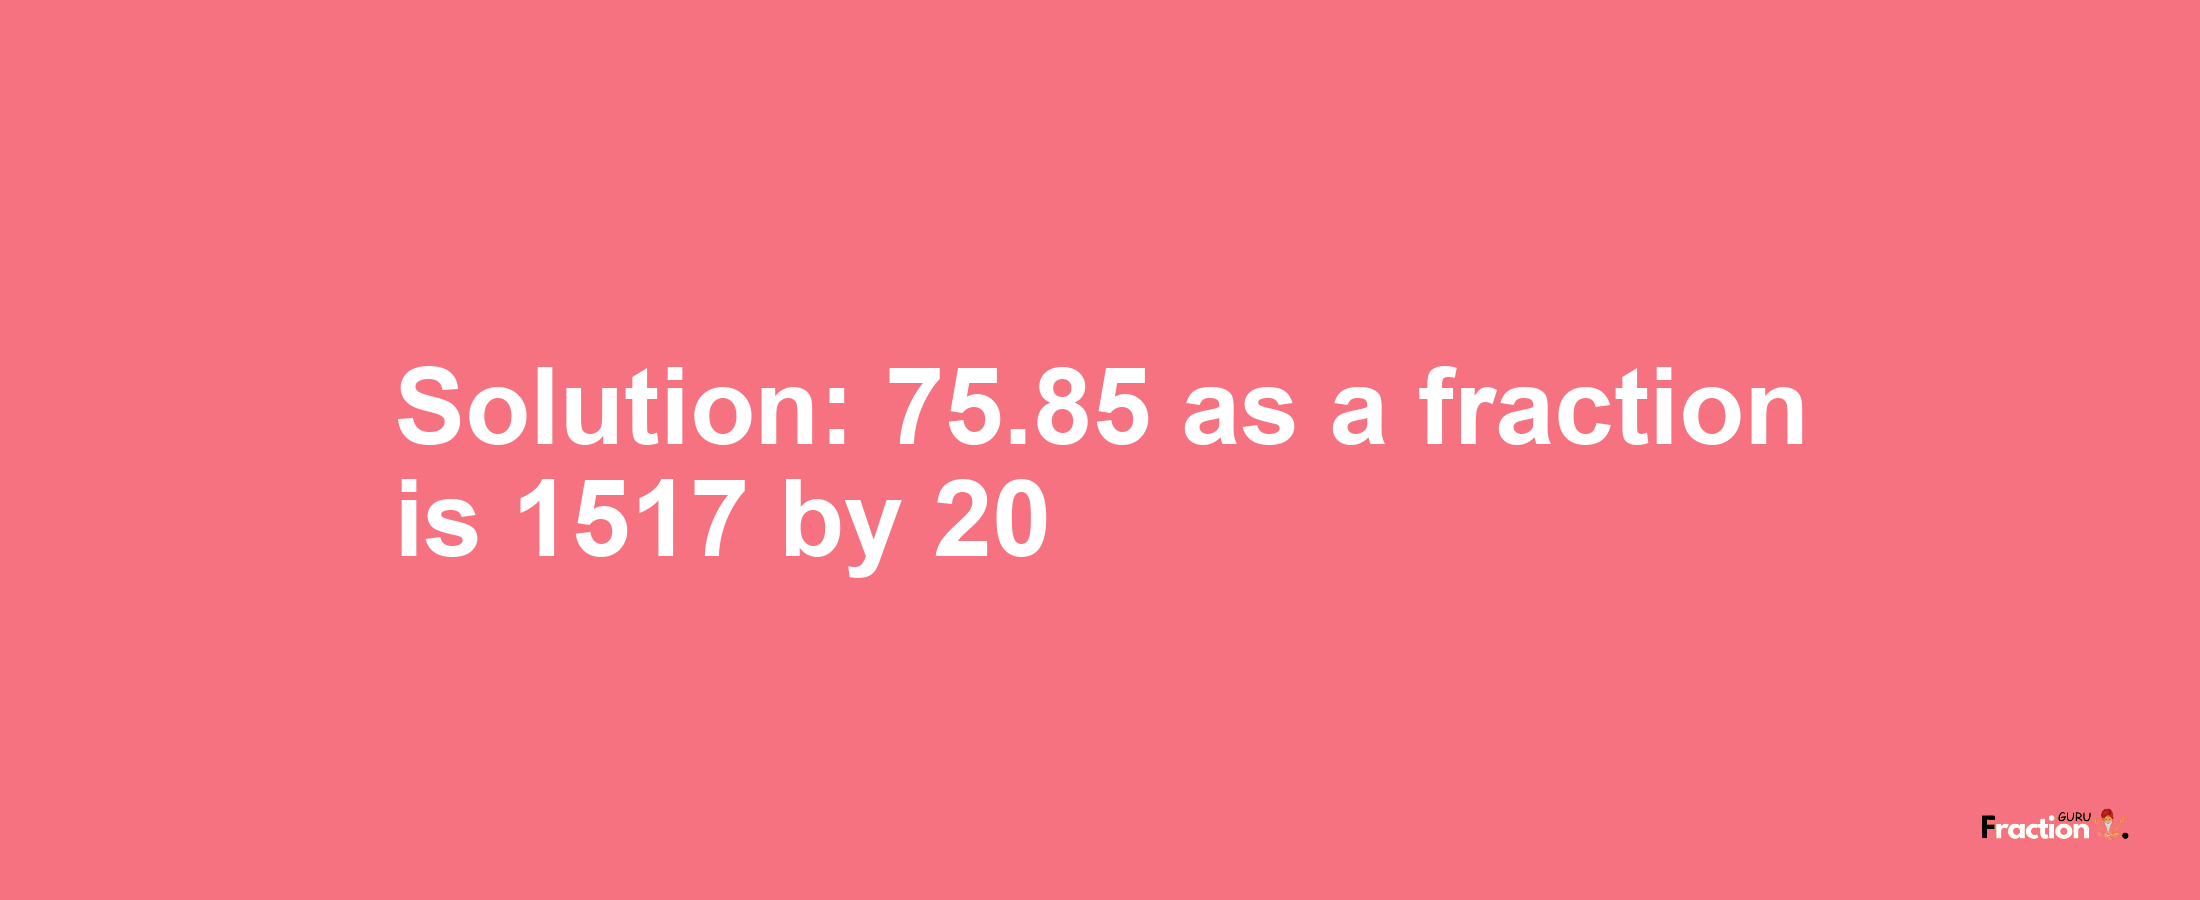 Solution:75.85 as a fraction is 1517/20